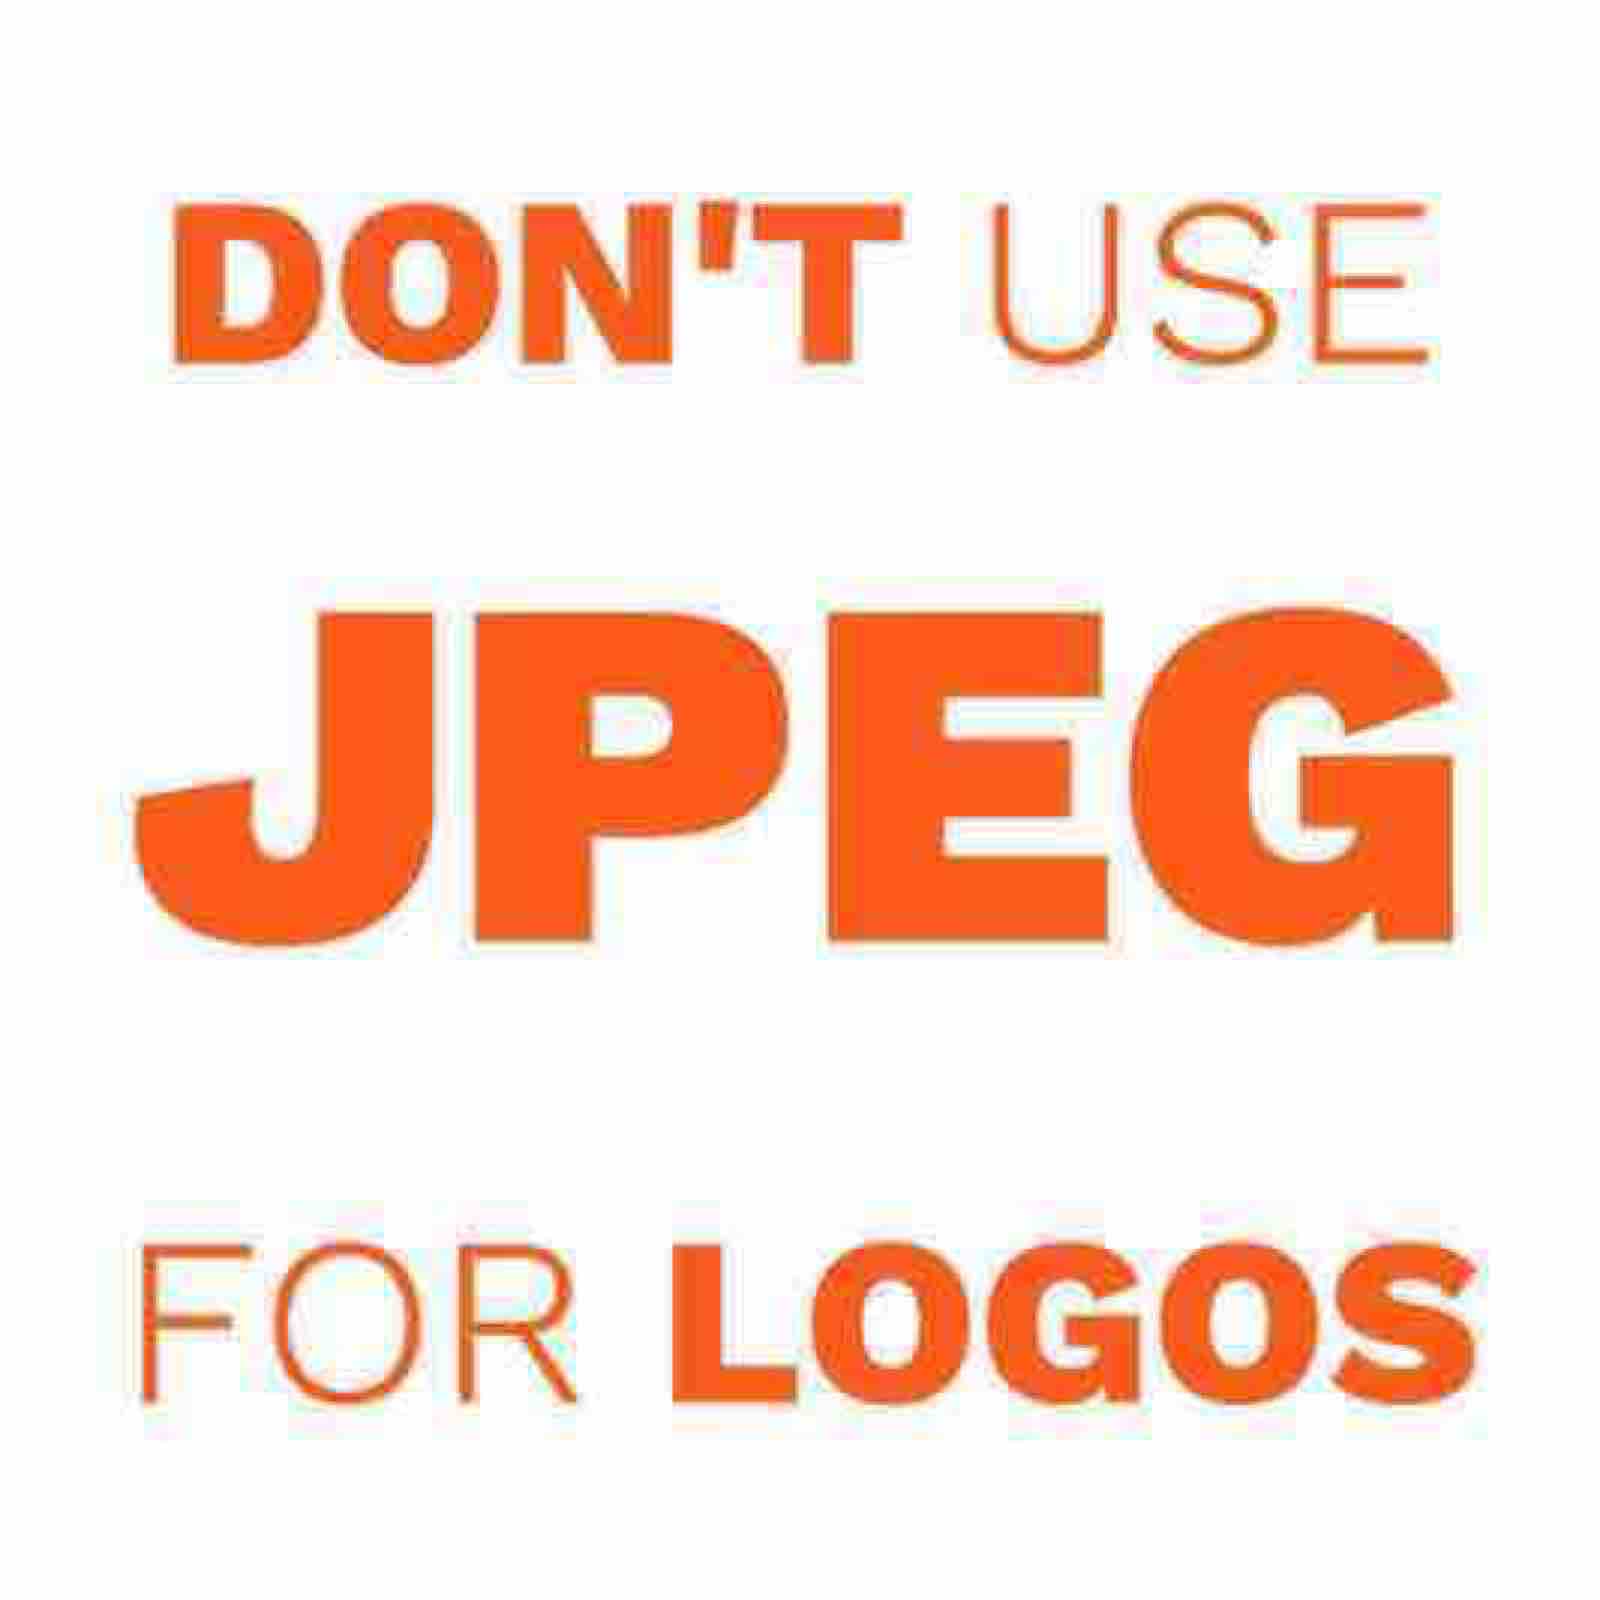 DON'T USE JPEG FOR LOGOS...